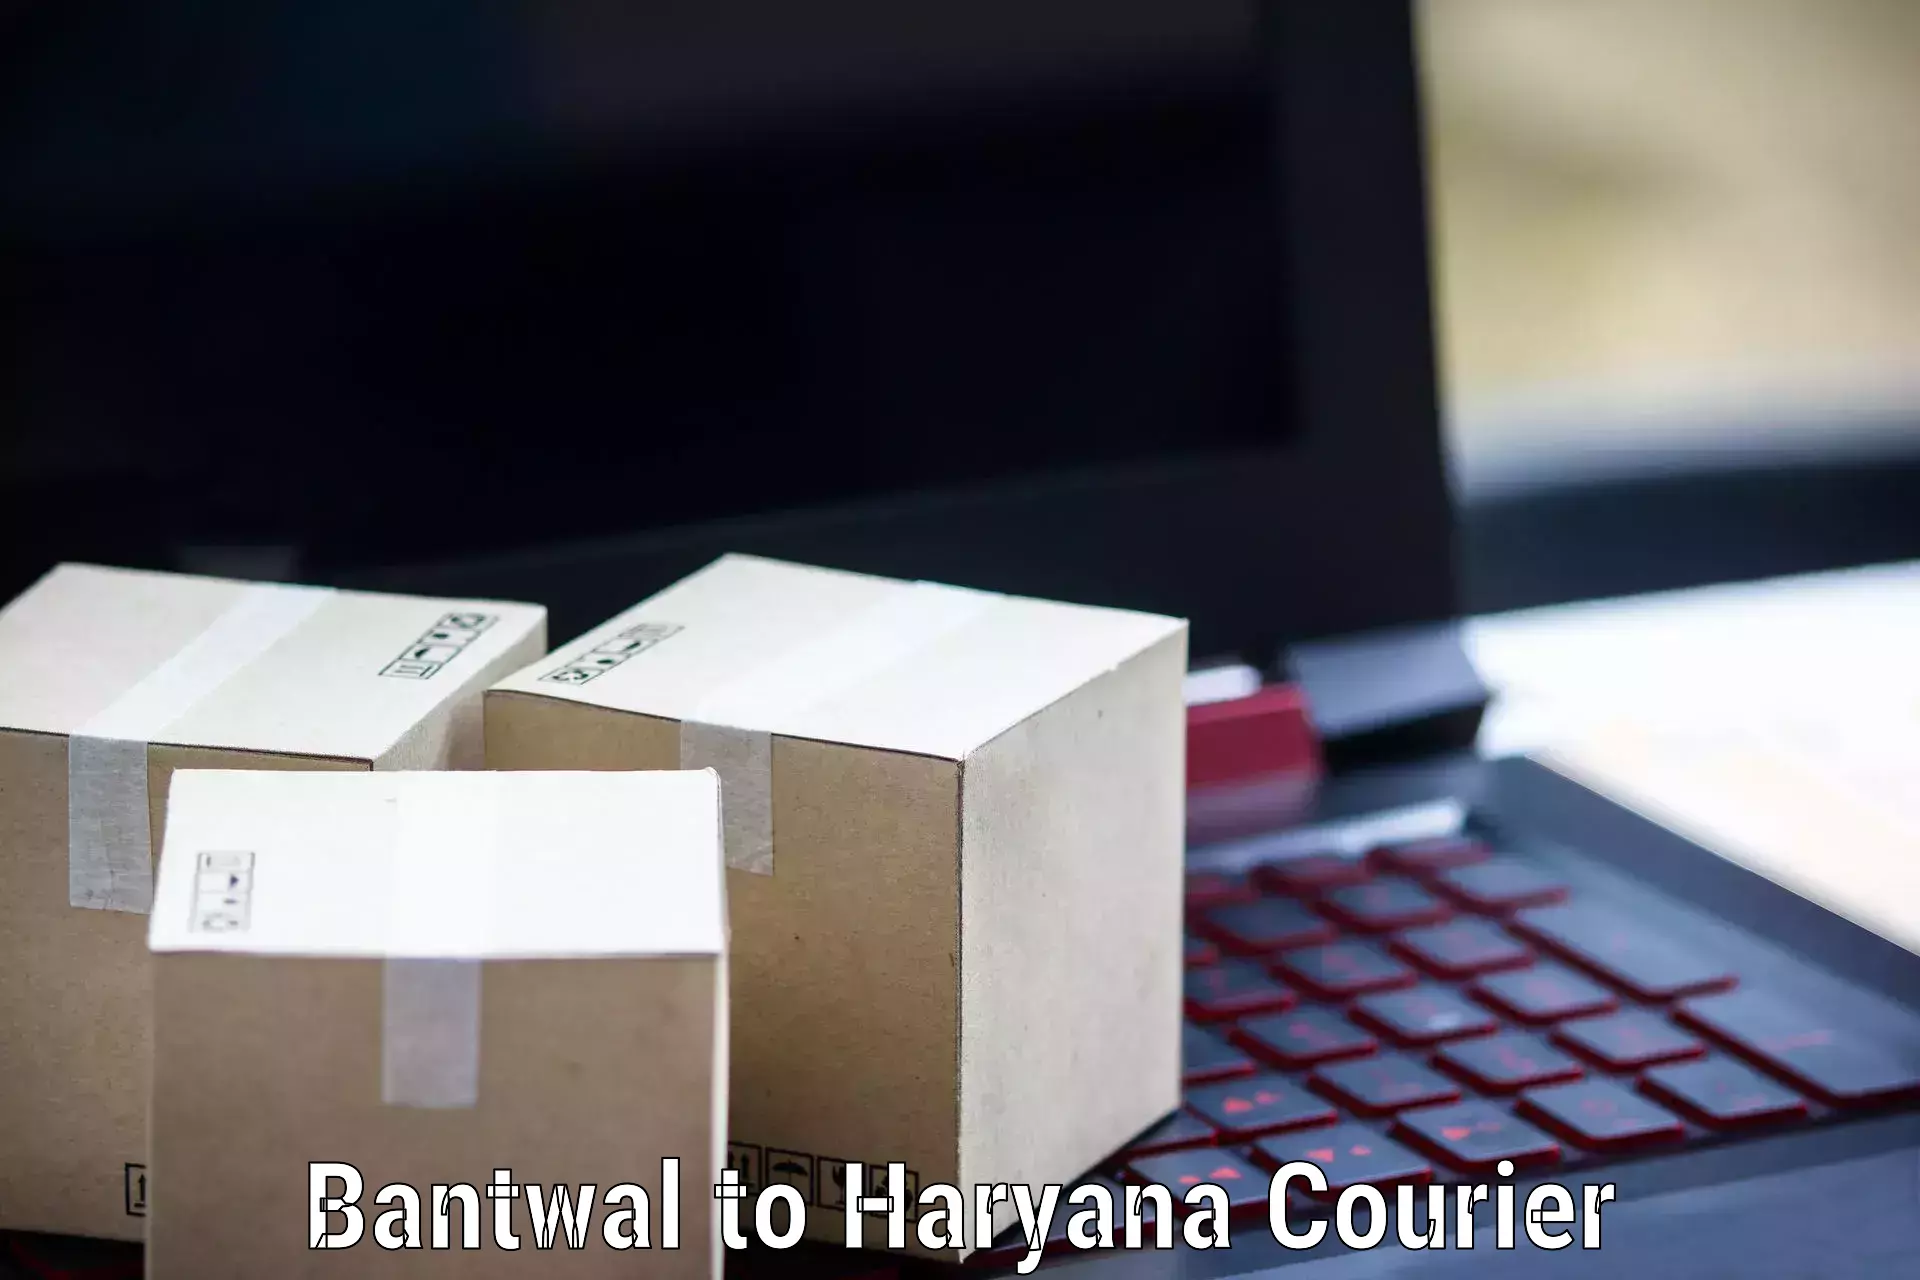 Courier service comparison Bantwal to Hodal